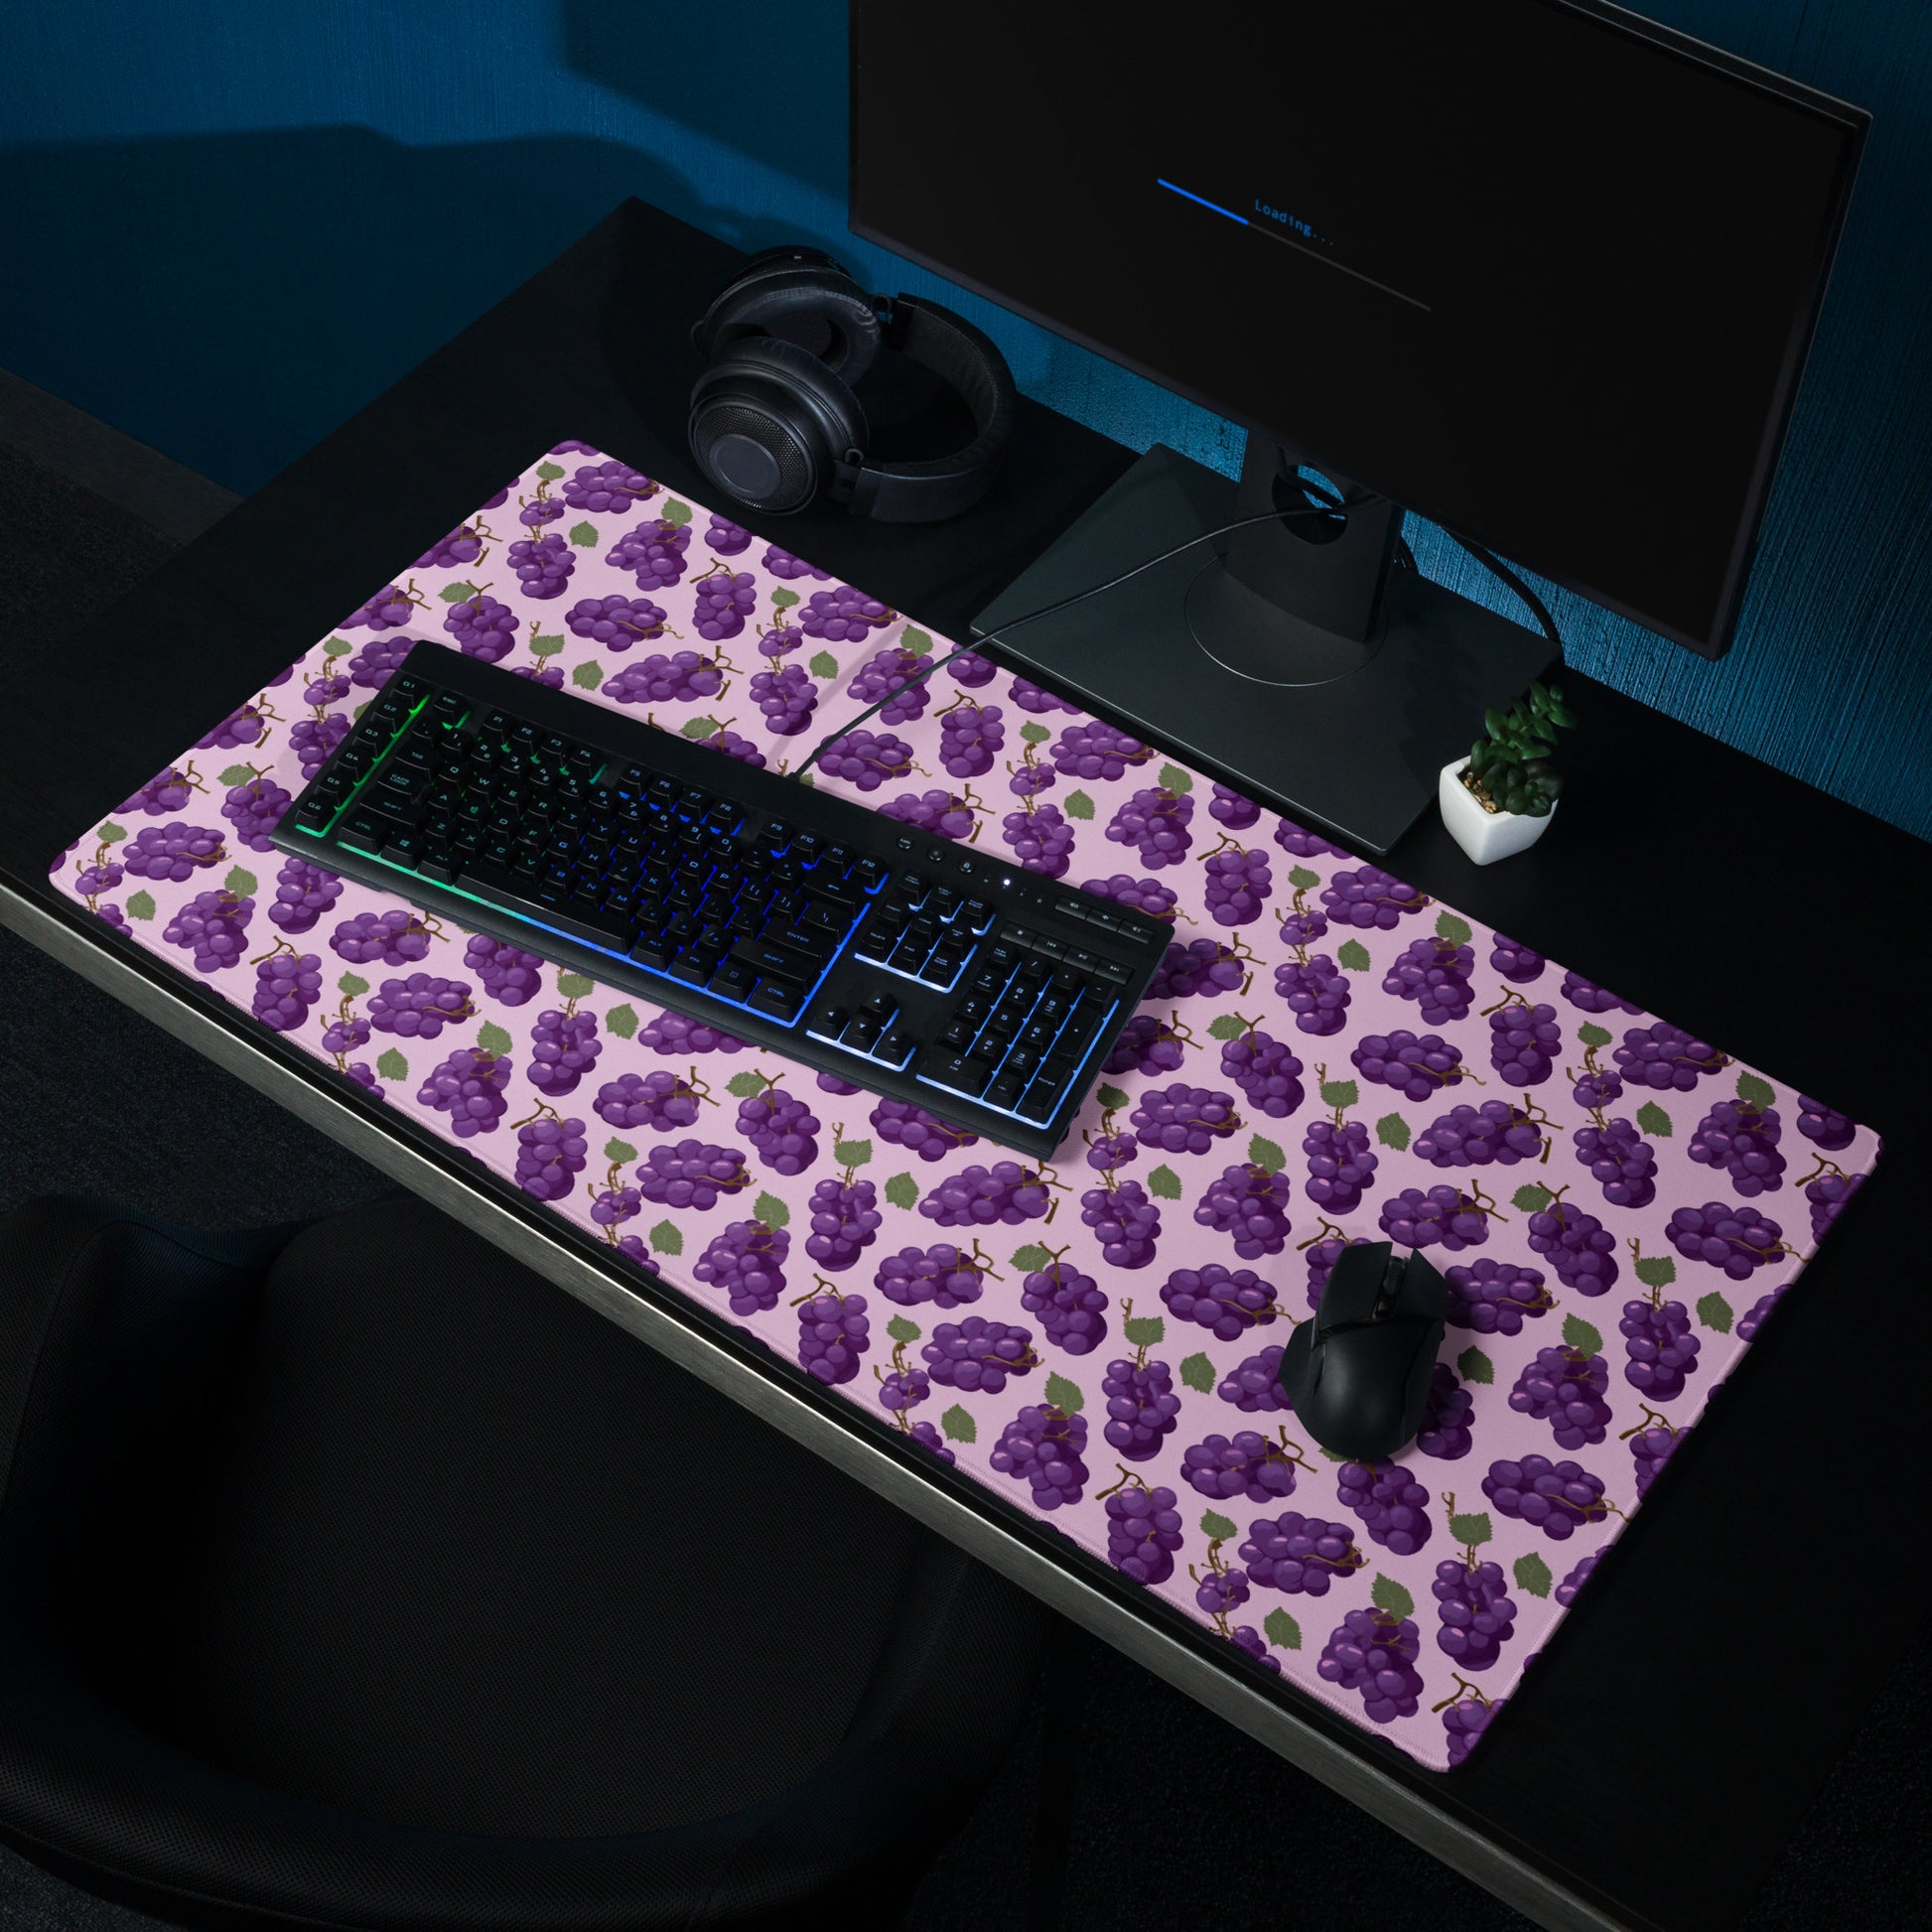 A 36" x 18" desk pad with bushels of grapes all over it shown on a desk setup. Purple in color.